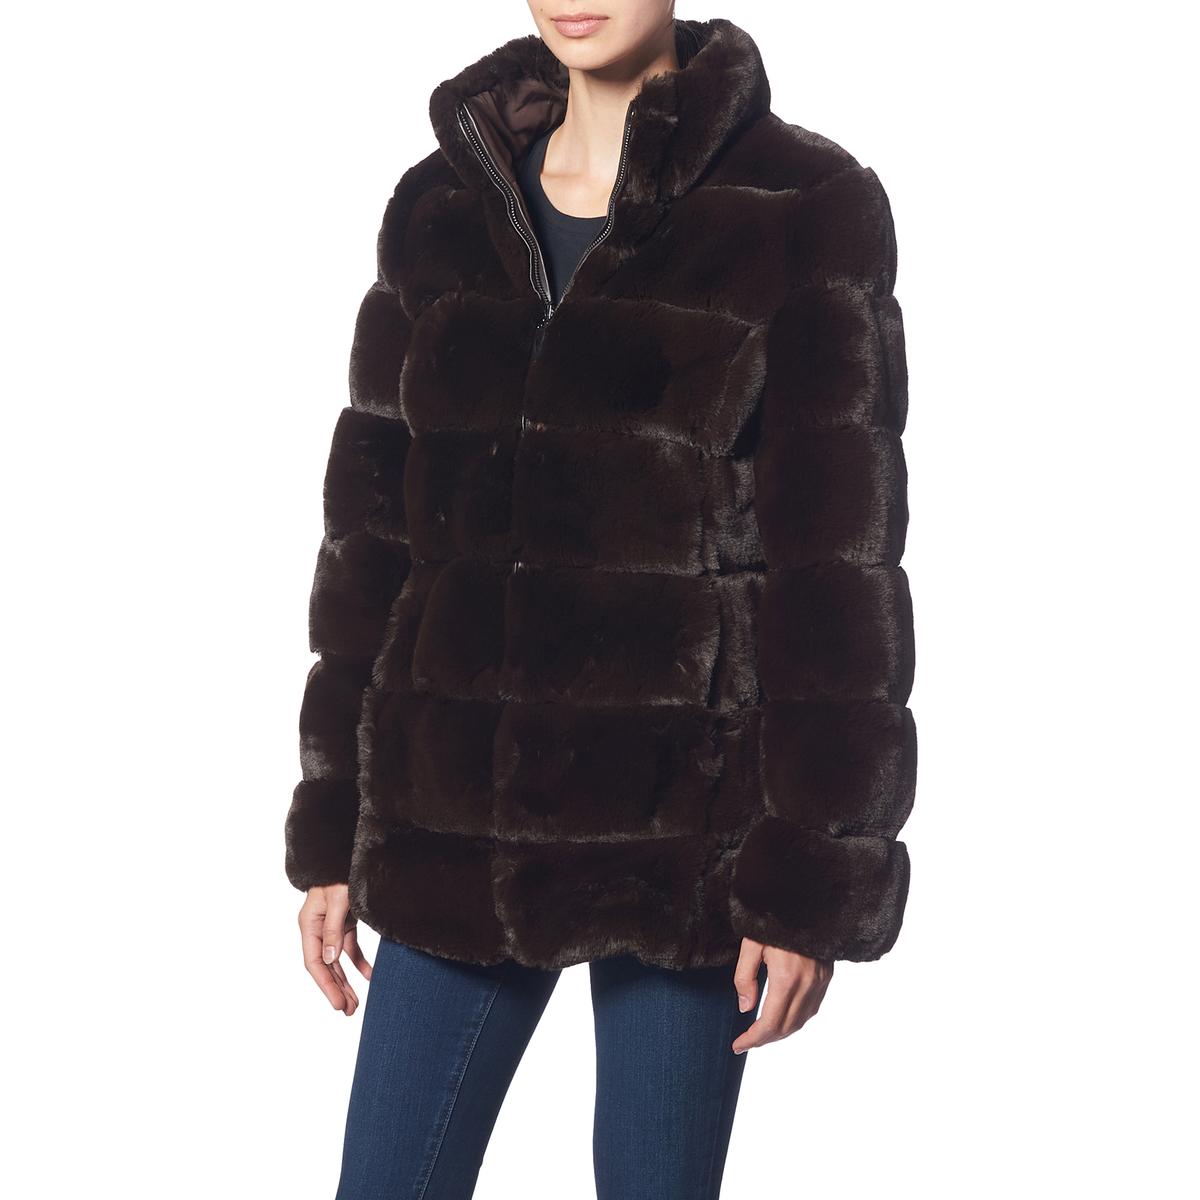 Via Spiga Women's Grooved Faux Fur Reversible Coat with Stand Collar | eBay